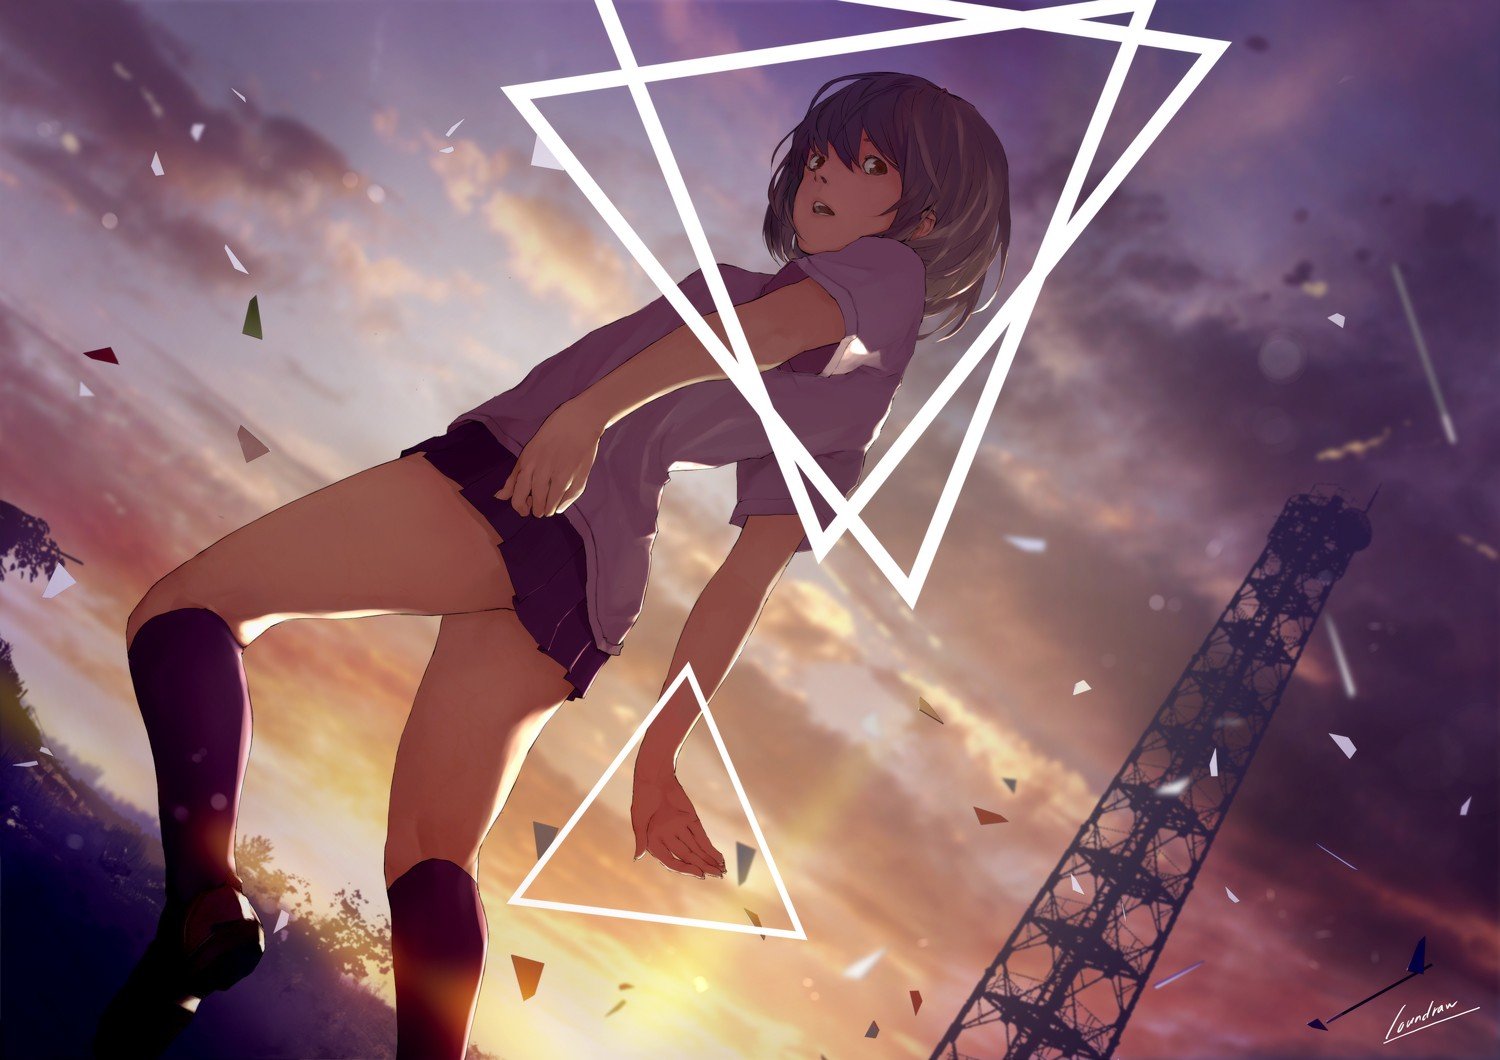 brunettes, Sunset, Clouds, School, Uniforms, Schoolgirls, Skirts, Socks, Brown, Eyes, Short, Hair, Scenic, Open, Mouth, Soft, Shading, Skyscapes, Anime, Girls, Looking, Back, Bangs, Triangles, Original, Characte Wallpaper